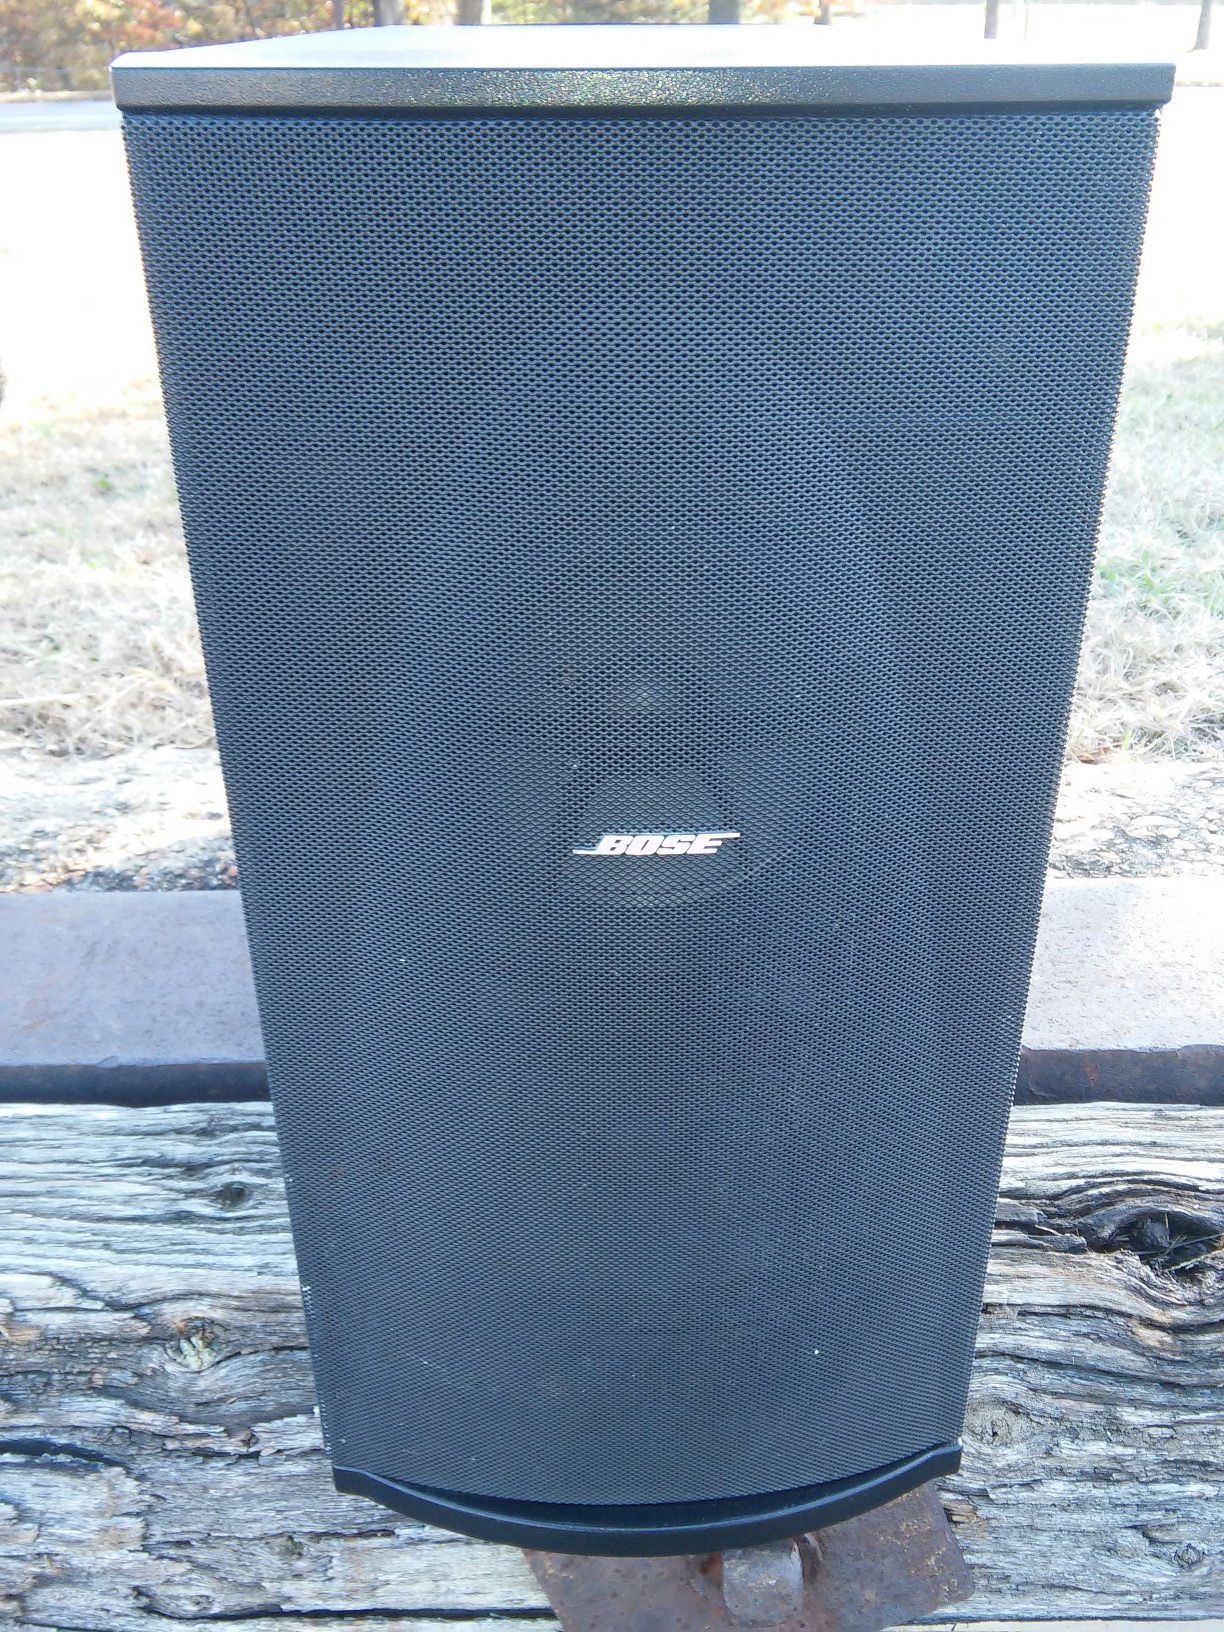 Bose PS28 subwoofer Lifestyle 18 28 38